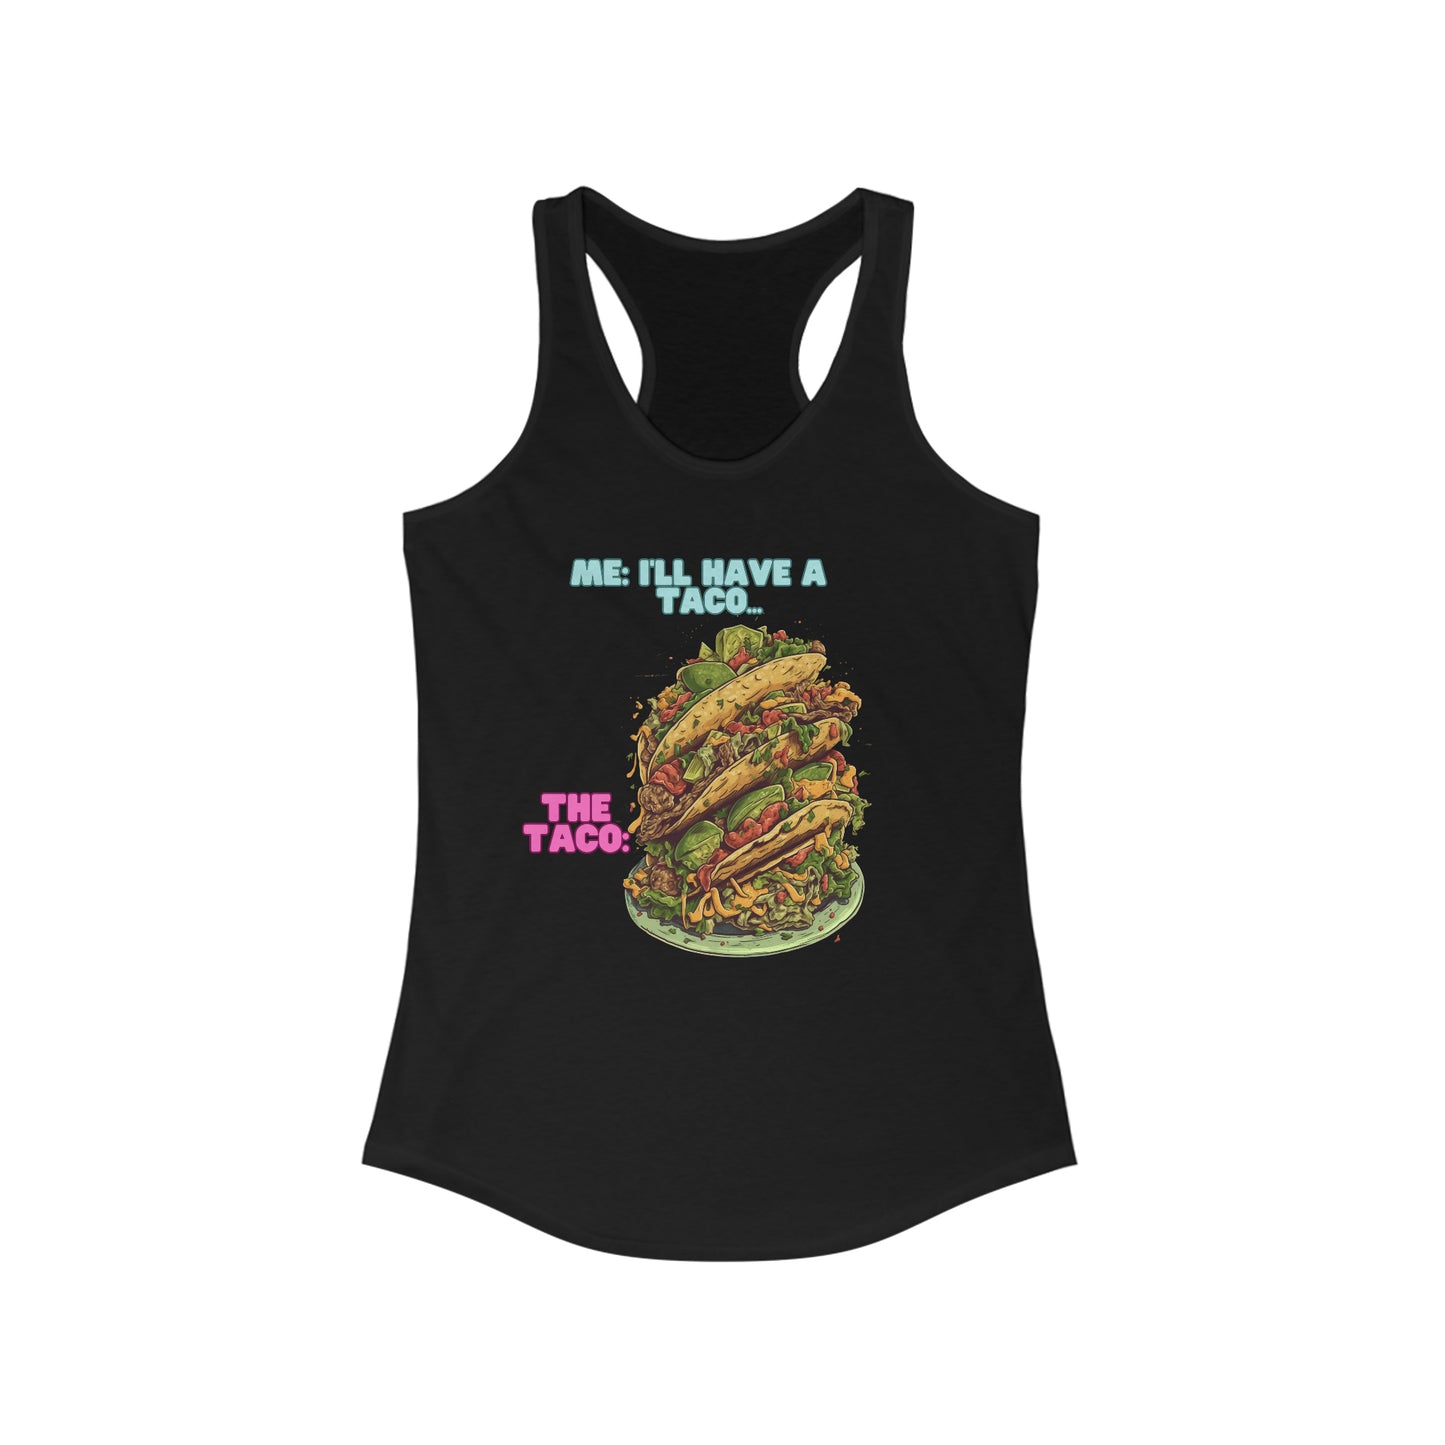 Have a Taco - Women's Ideal Racerback Tank